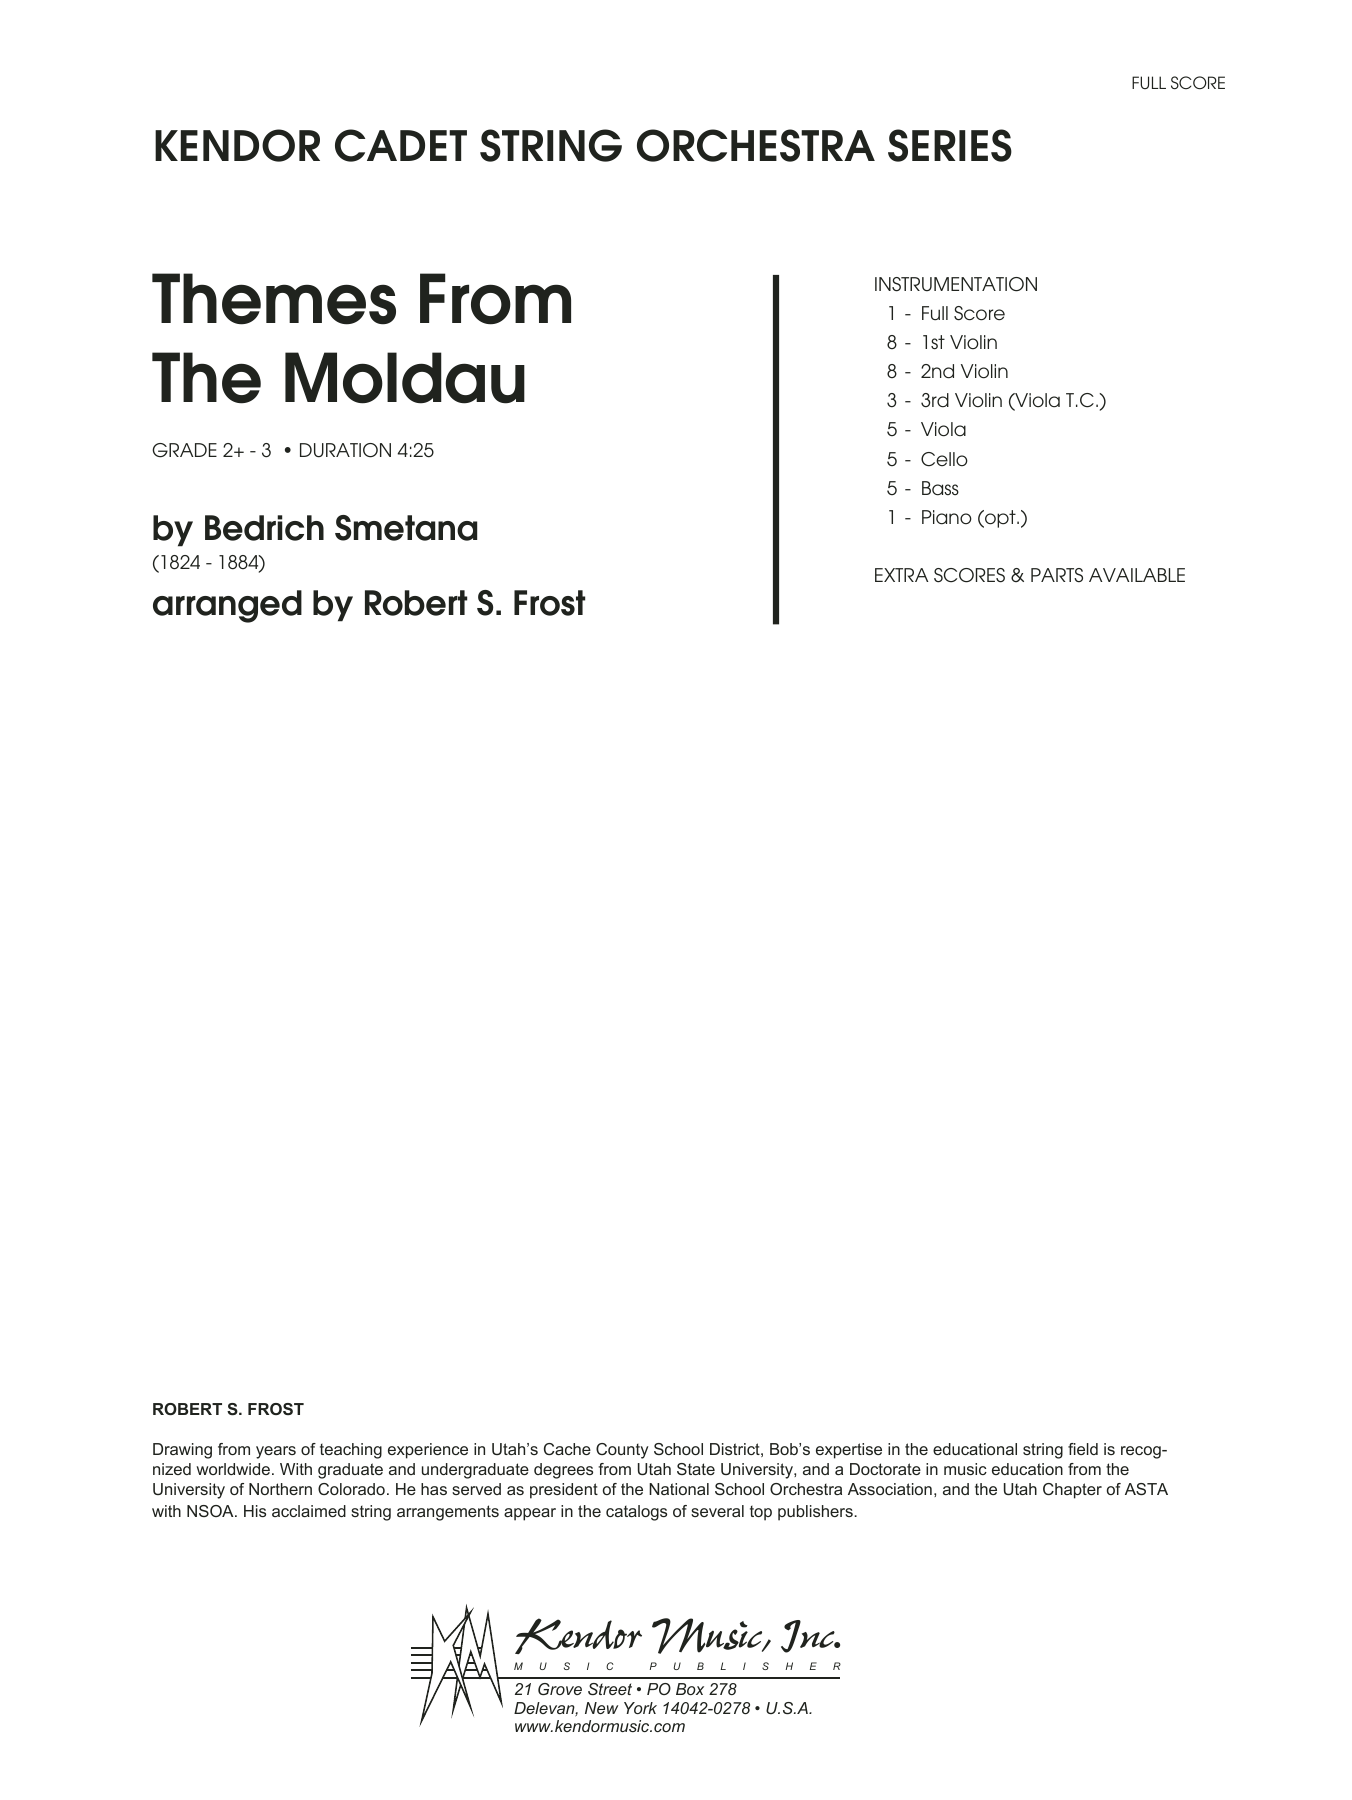 Download Robert S. Frost Themes From The Moldau - Full Score Sheet Music